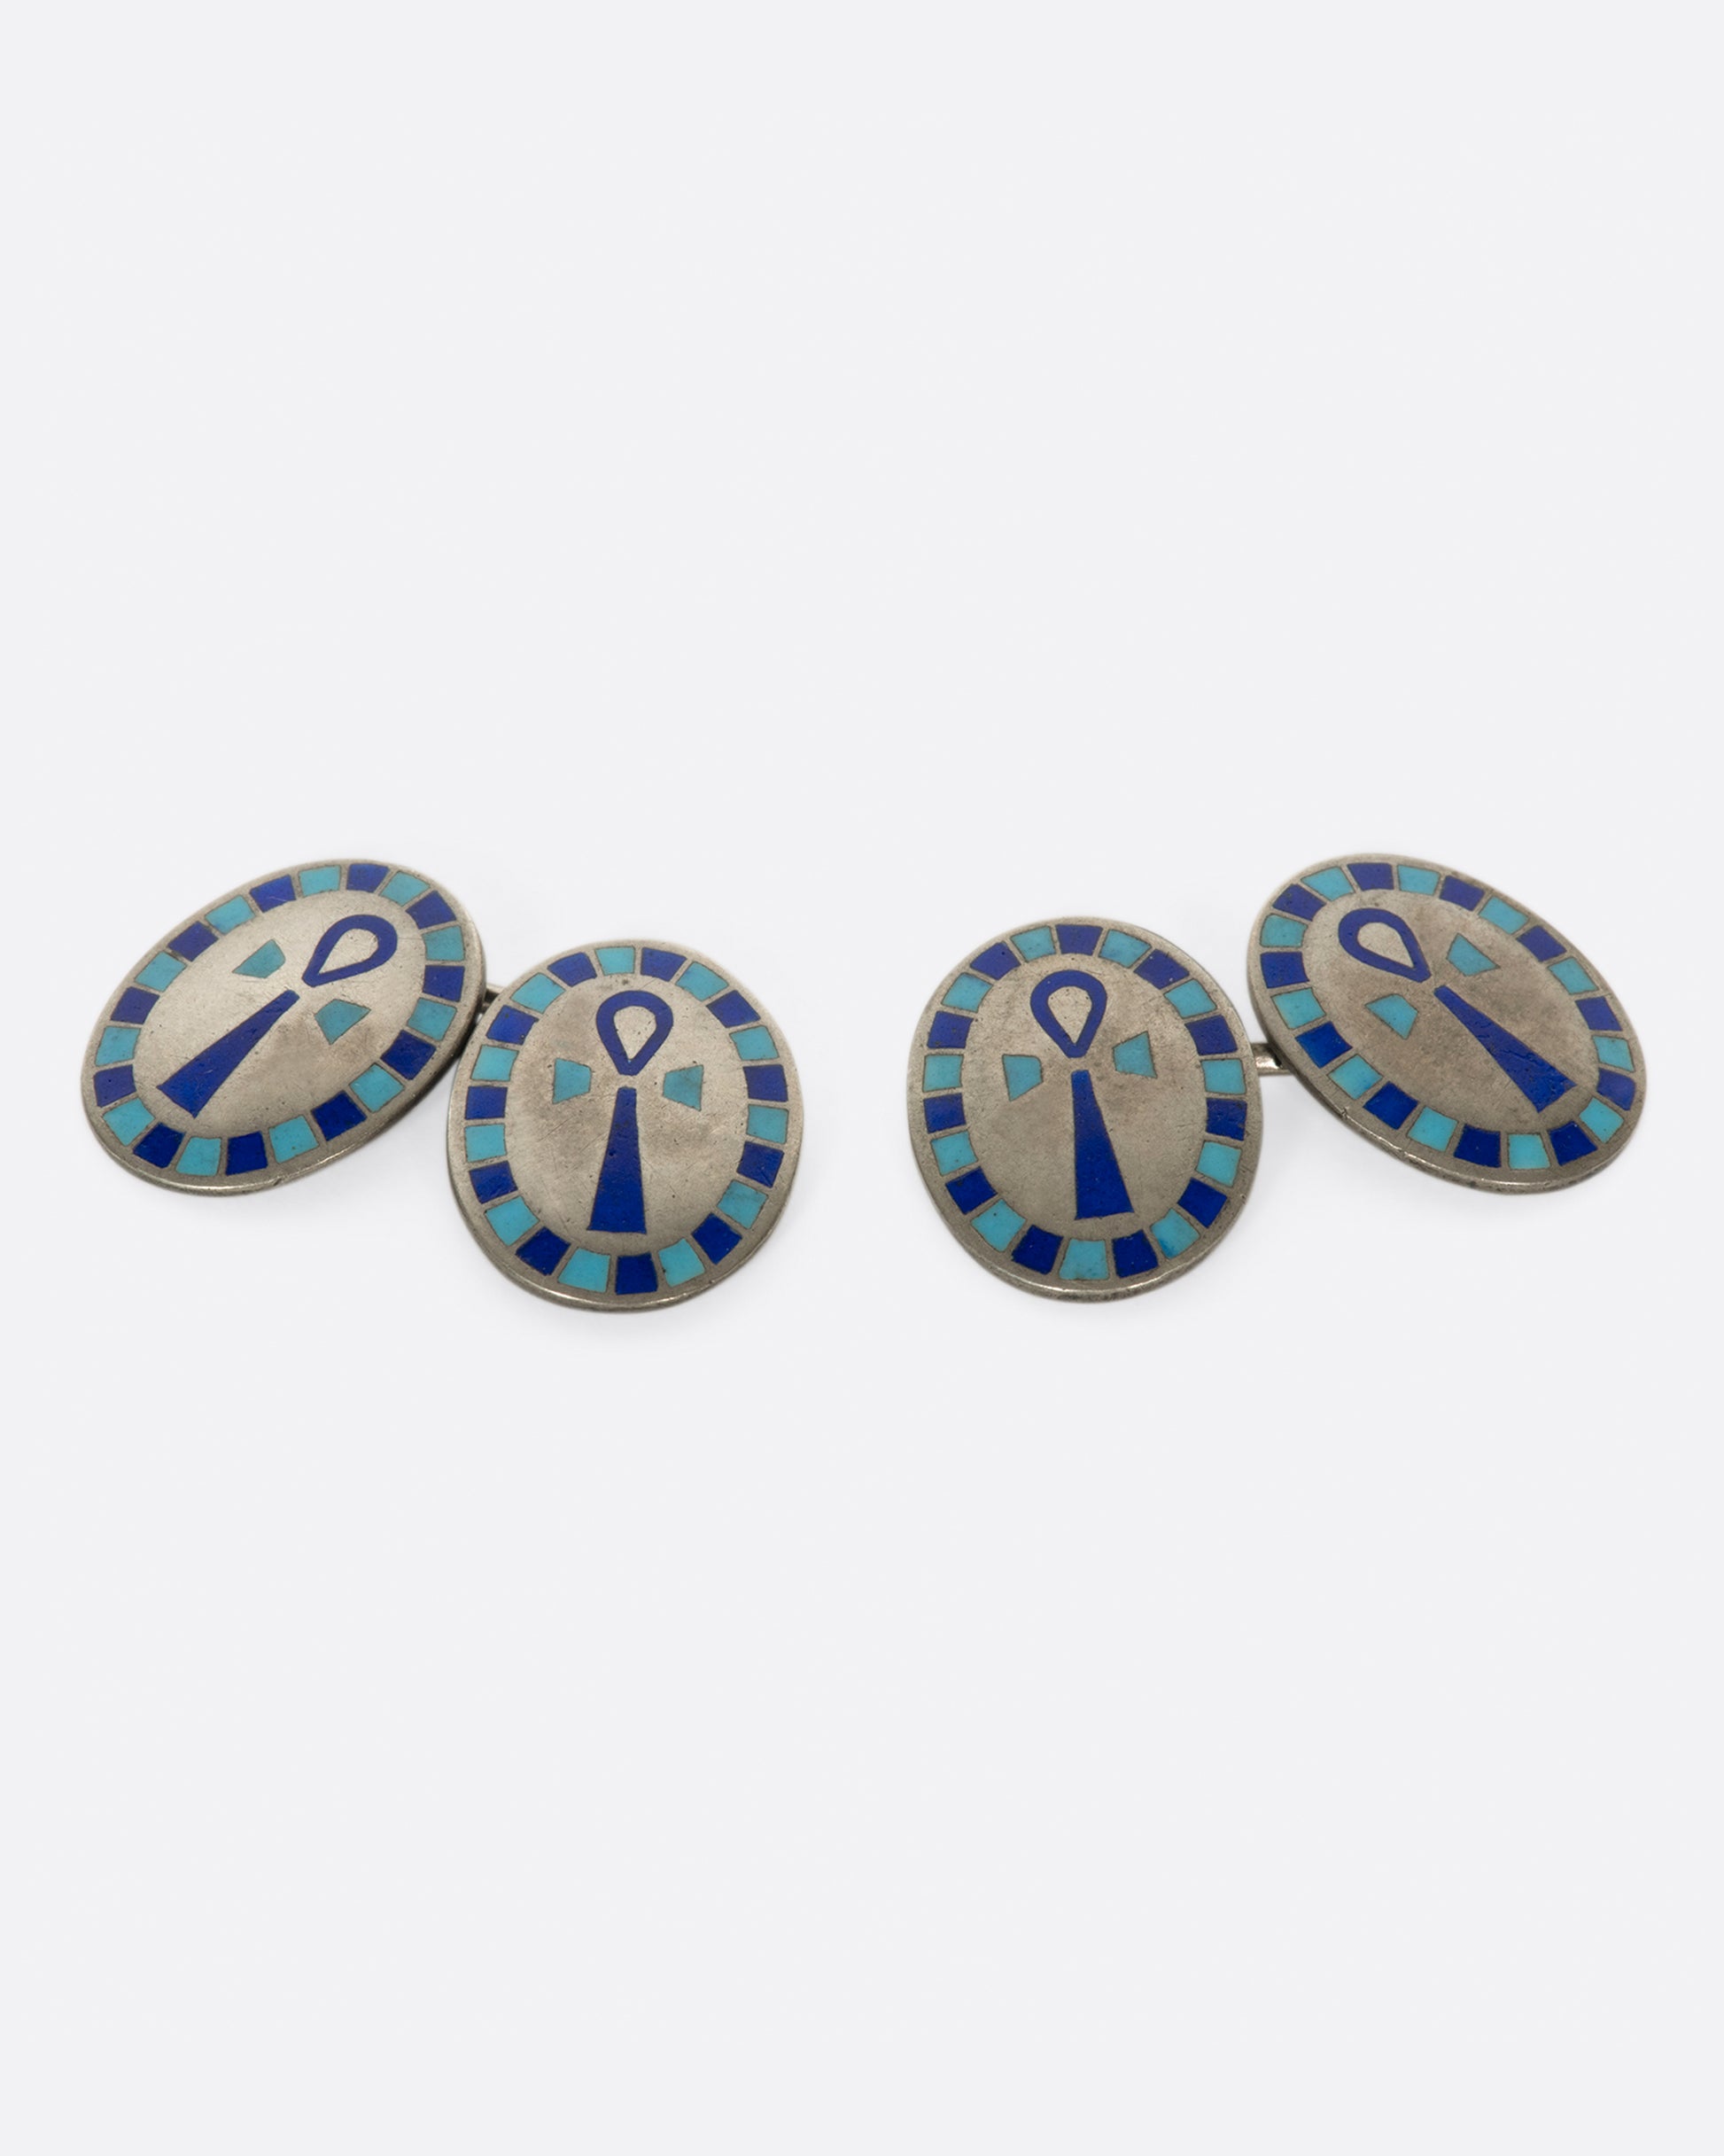 A pair of Egyptian Revival cufflinks featuring the Egyptian symbol of life, the ankh.